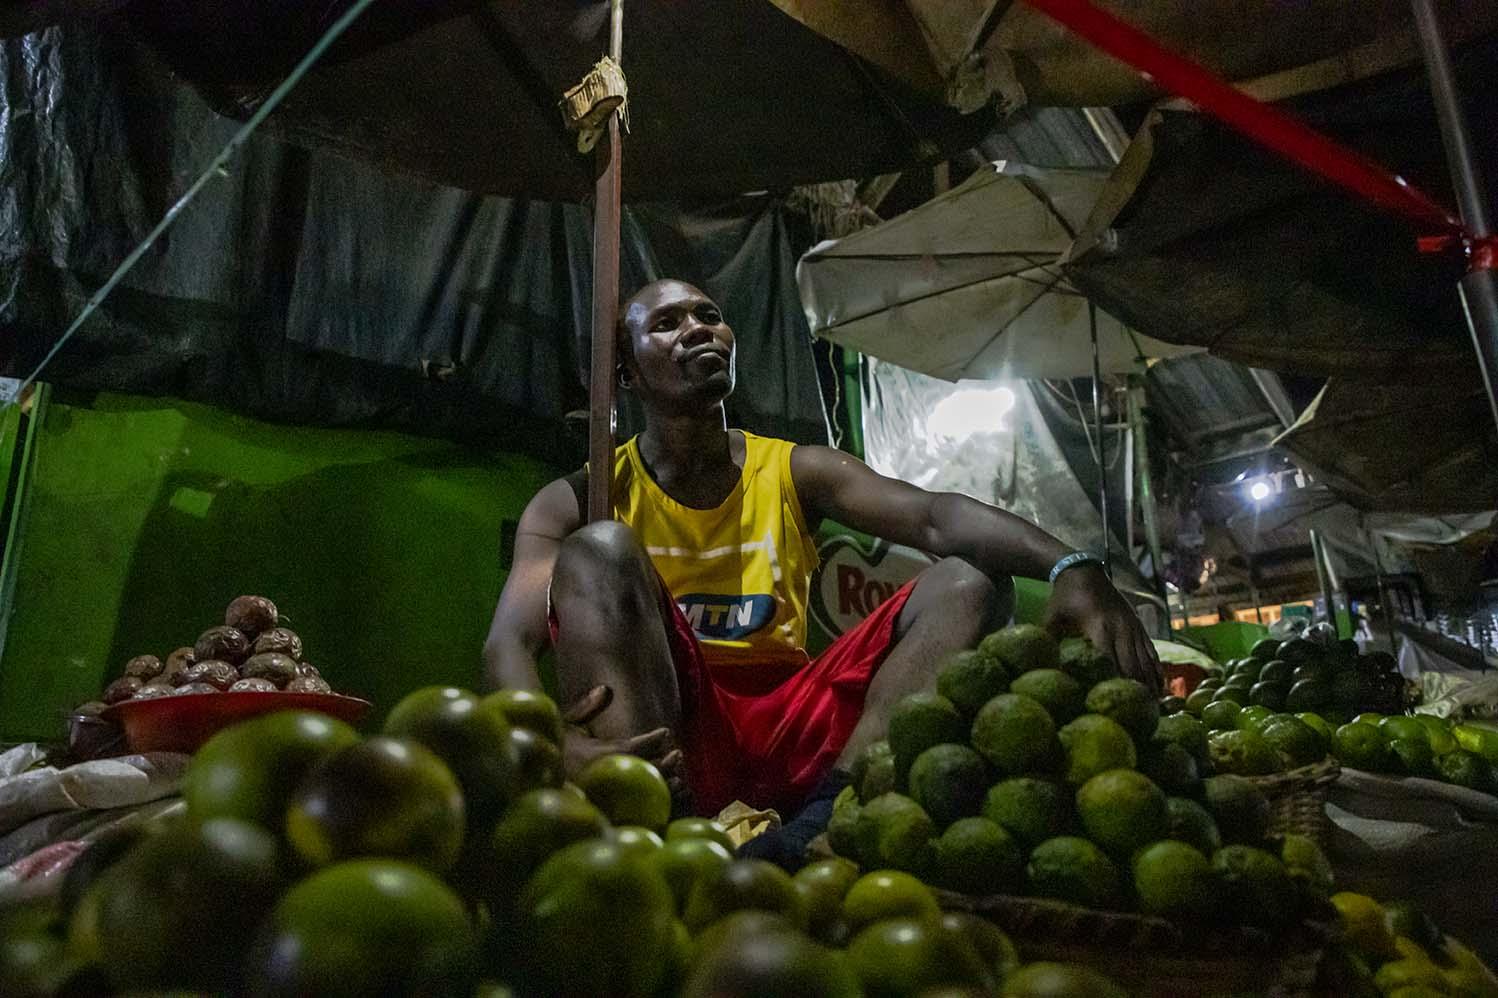 Basalirwa Godfrey, a Nakawa Market vendor, has a bicycle but could not ride it to his home and back everyday because he lives too far. His first night sleeping in market seemed safe, so he decided to join his colleague sleeping over. Godfrey rode home every weekend to check on his family.